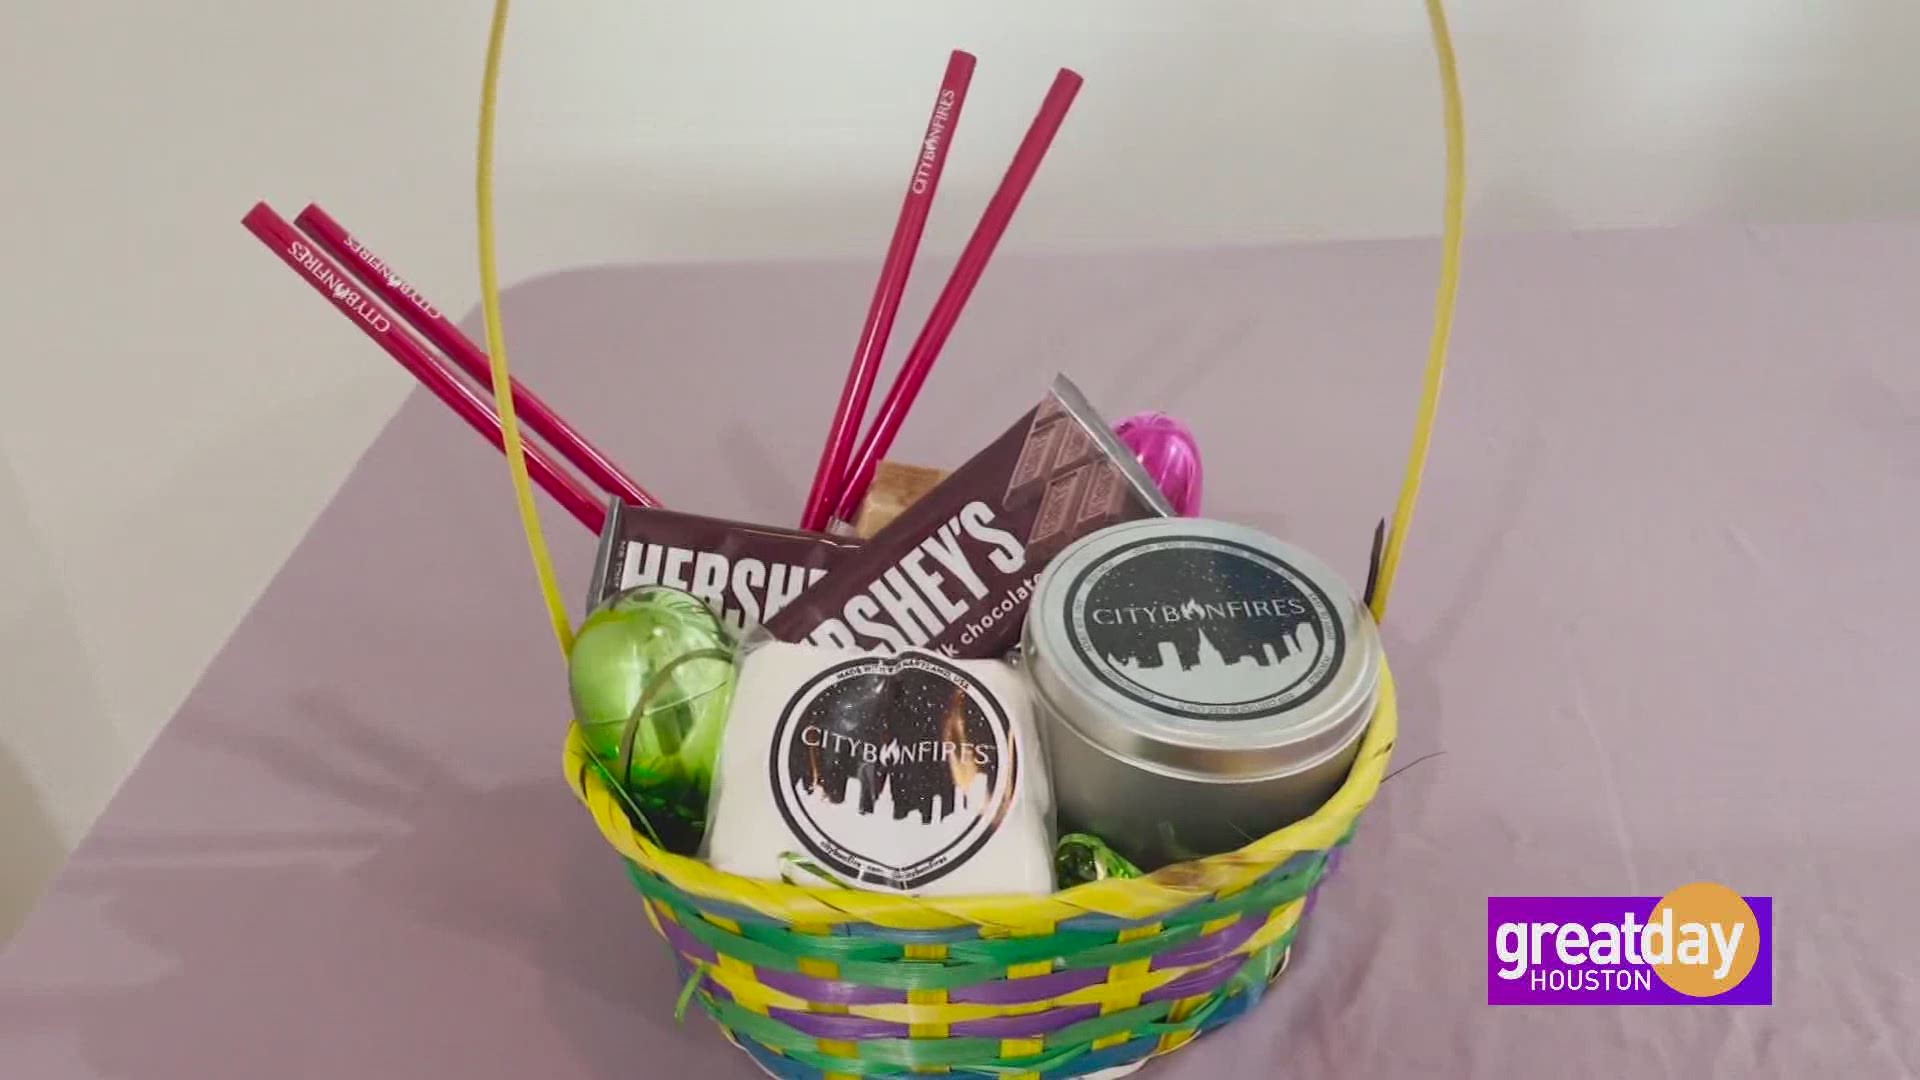 Lifestyle expert Lindsay Myers shows us Easter baskets the entire family can enjoy.